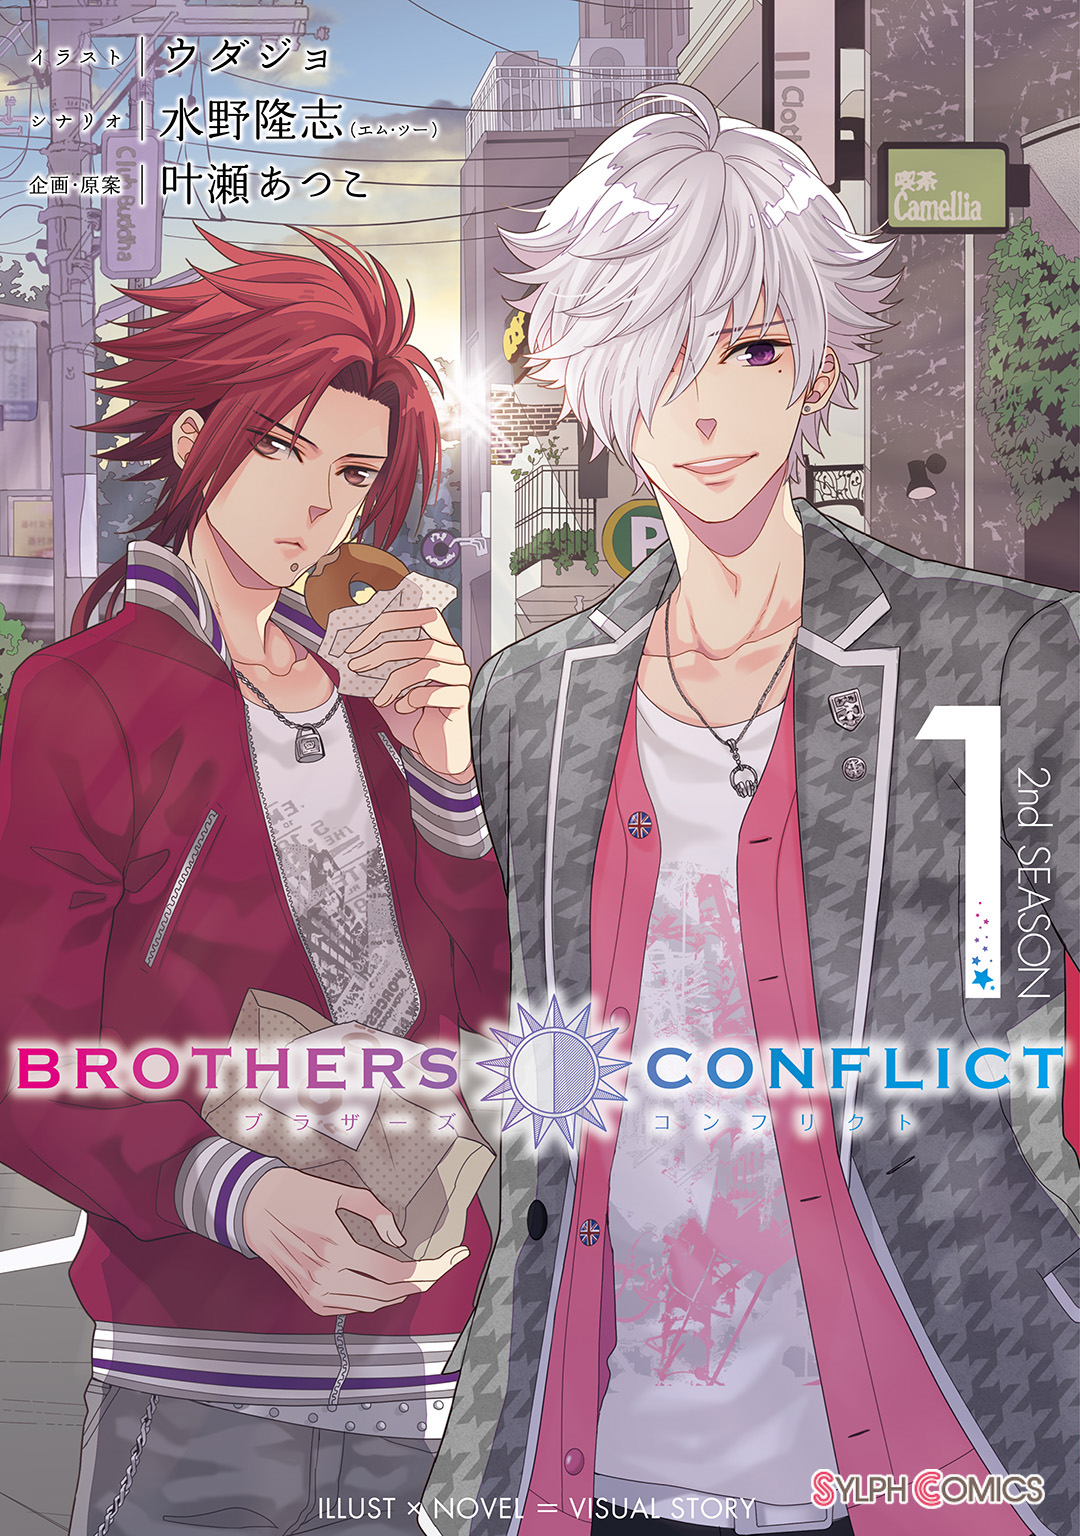 BROTHERS CONFLICT 2nd SEASON（1） - ウダジョ/水野隆志（エム・ツー 